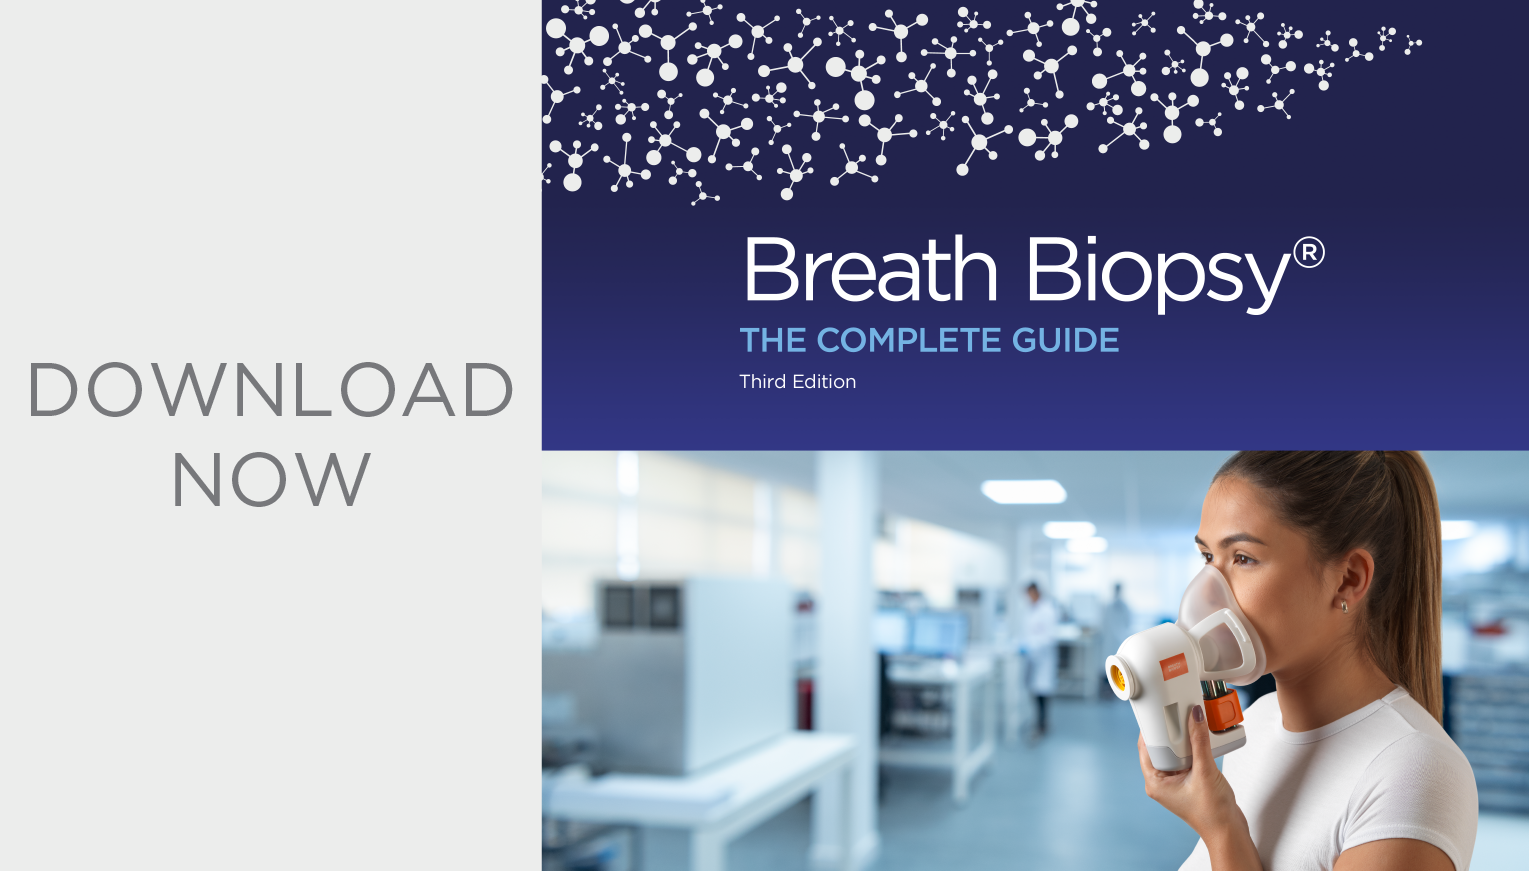 Third Edition of Breath Biopsy: The Complete Guide